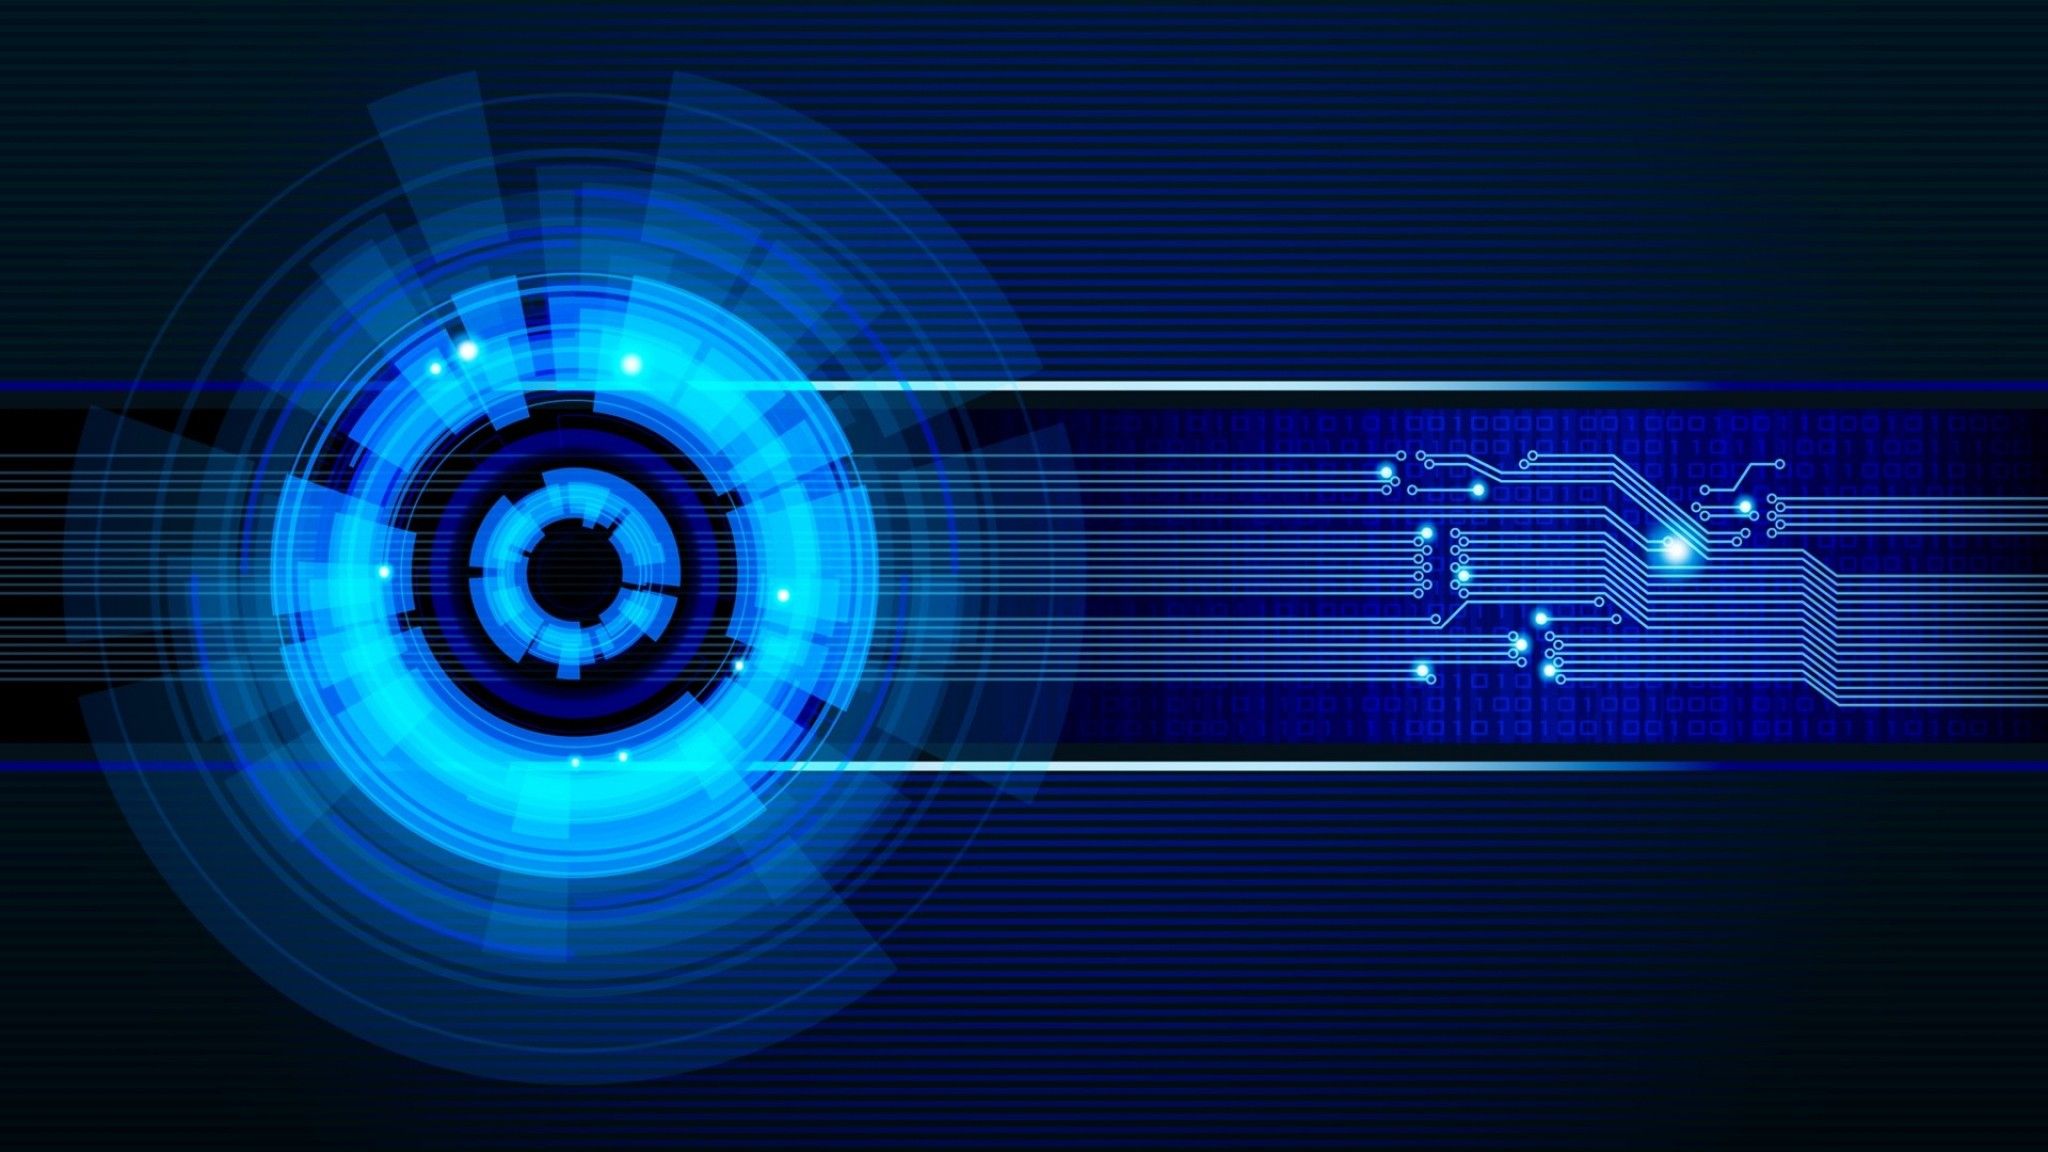 Free download 2048x1152 2048x1152 Wallpaper neon light circles Technology [2048x1152] for your Desktop, Mobile & Tablet. Explore Background 2048X1152x1152 Anime Wallpaper, 2048x1152 Wallpaper, 2048x1152 Gaming Wallpaper